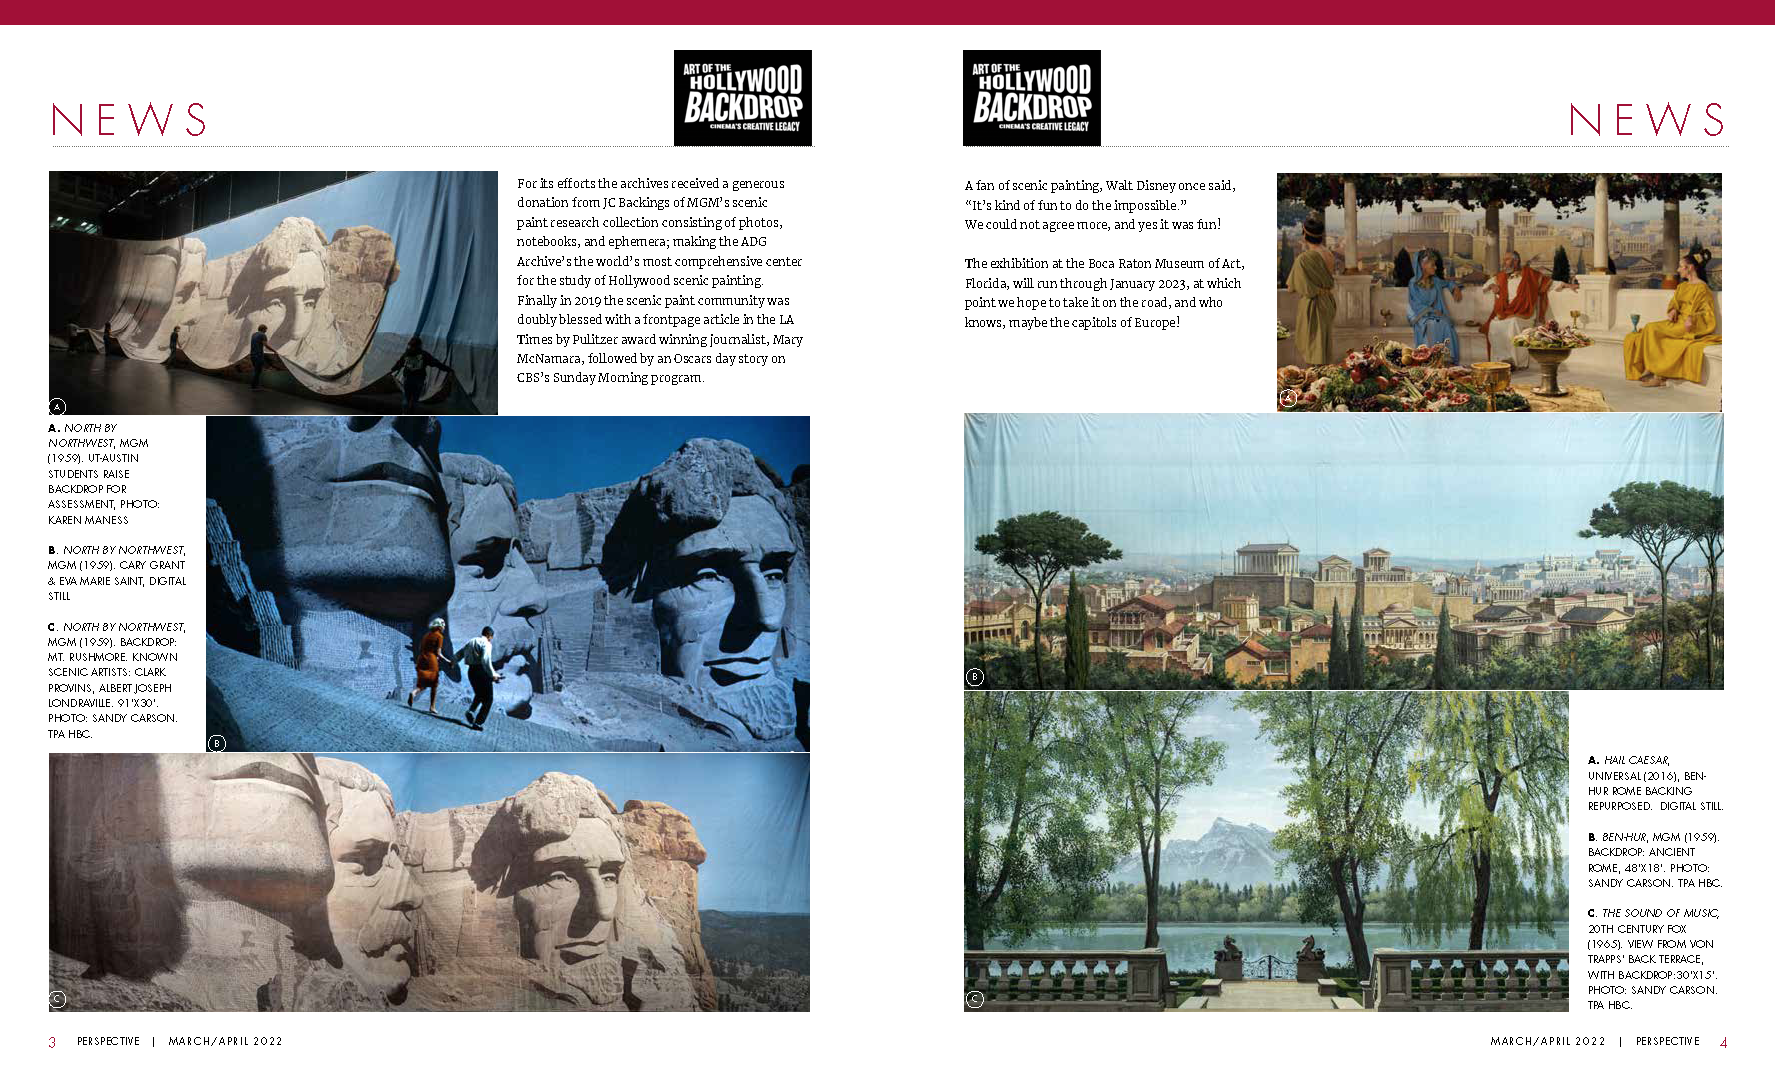 ADG_PerspectiveMagazine_News_BackdropsV2_Page_2.png